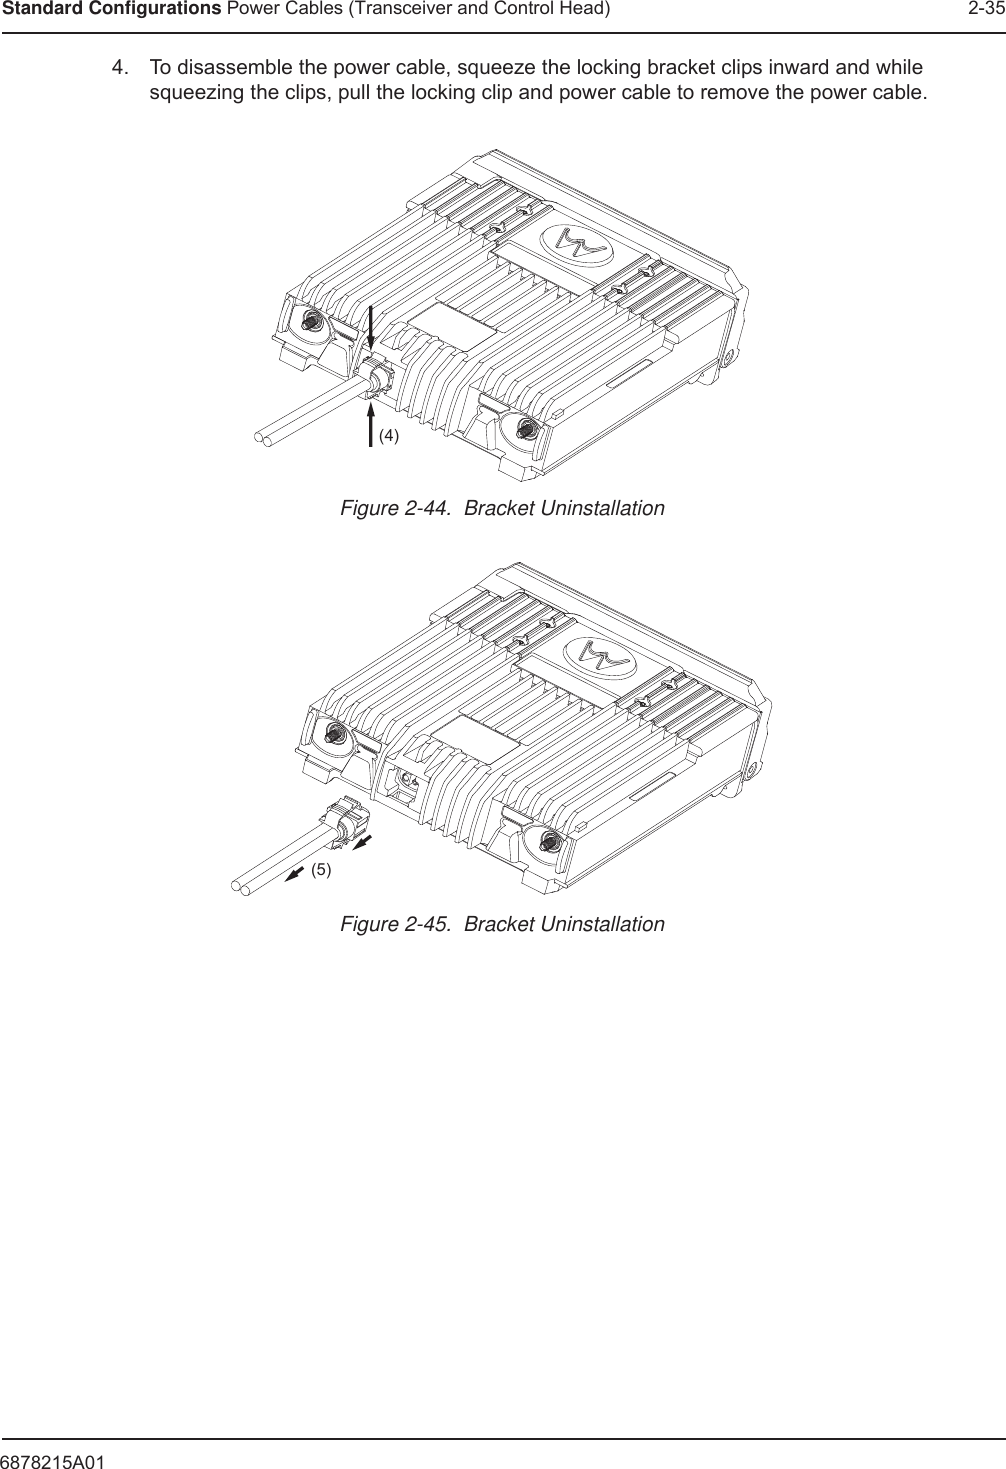 6878215A01Standard Configurations Power Cables (Transceiver and Control Head) 2-354. To disassemble the power cable, squeeze the locking bracket clips inward and while squeezing the clips, pull the locking clip and power cable to remove the power cable.Figure 2-44.  Bracket UninstallationFigure 2-45.  Bracket Uninstallation(4)(5)